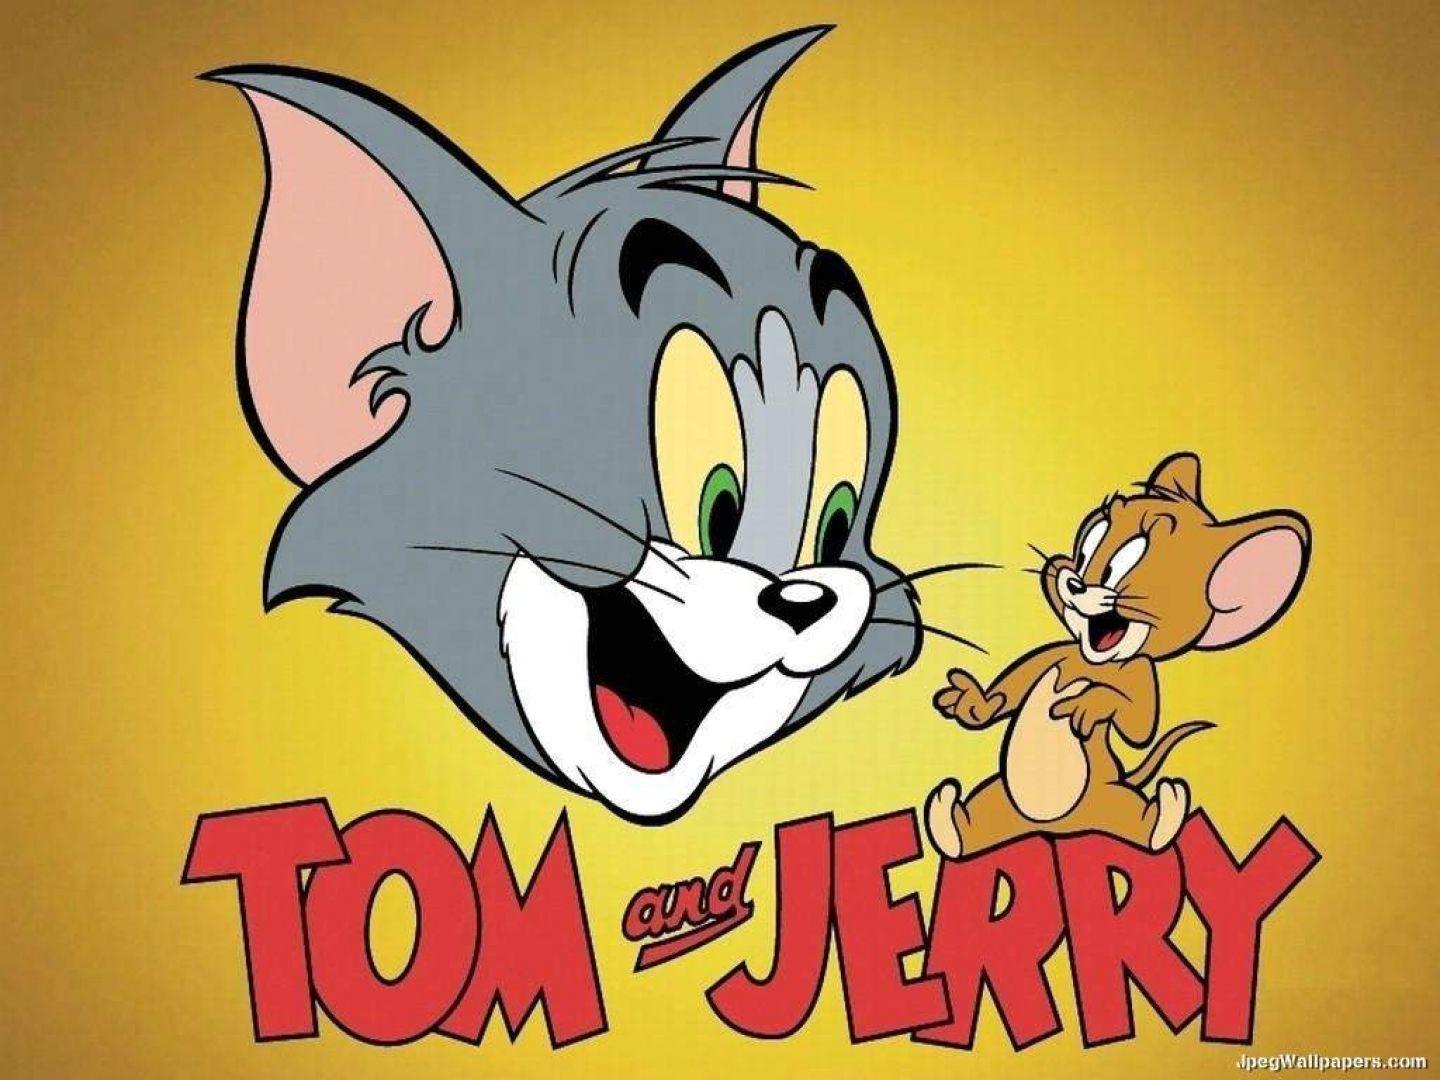 Tom and Jerry are two of the most recognizable characters in the world. - Tom and Jerry